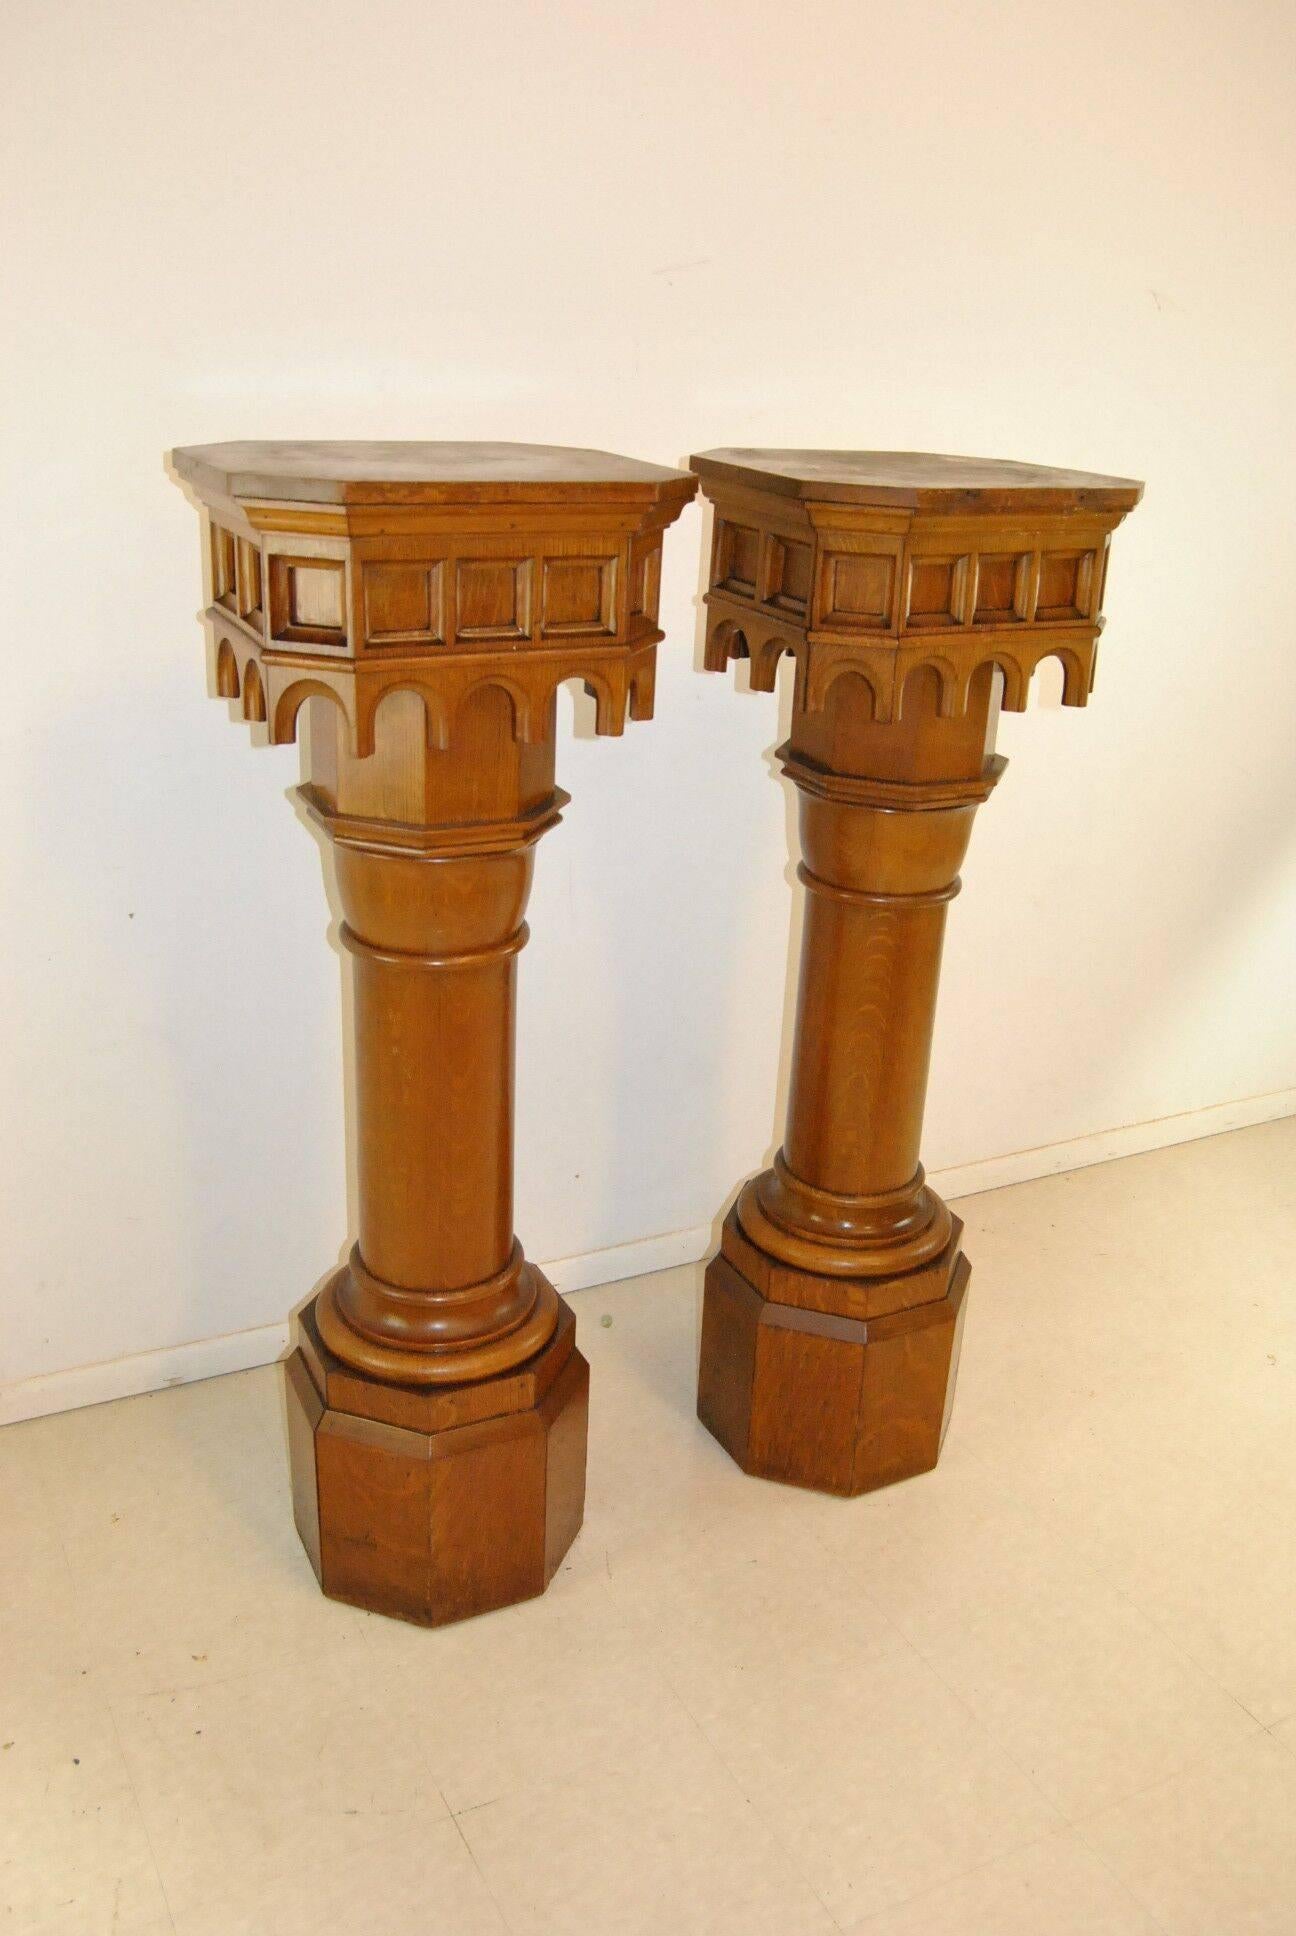 A beautiful pair of Gothic style pedestals done in quarter swan oak. The tops have an octagonal style design and a beautiful carved skirt surrounding them. They are solid oak and very well made. The dimensions are 19